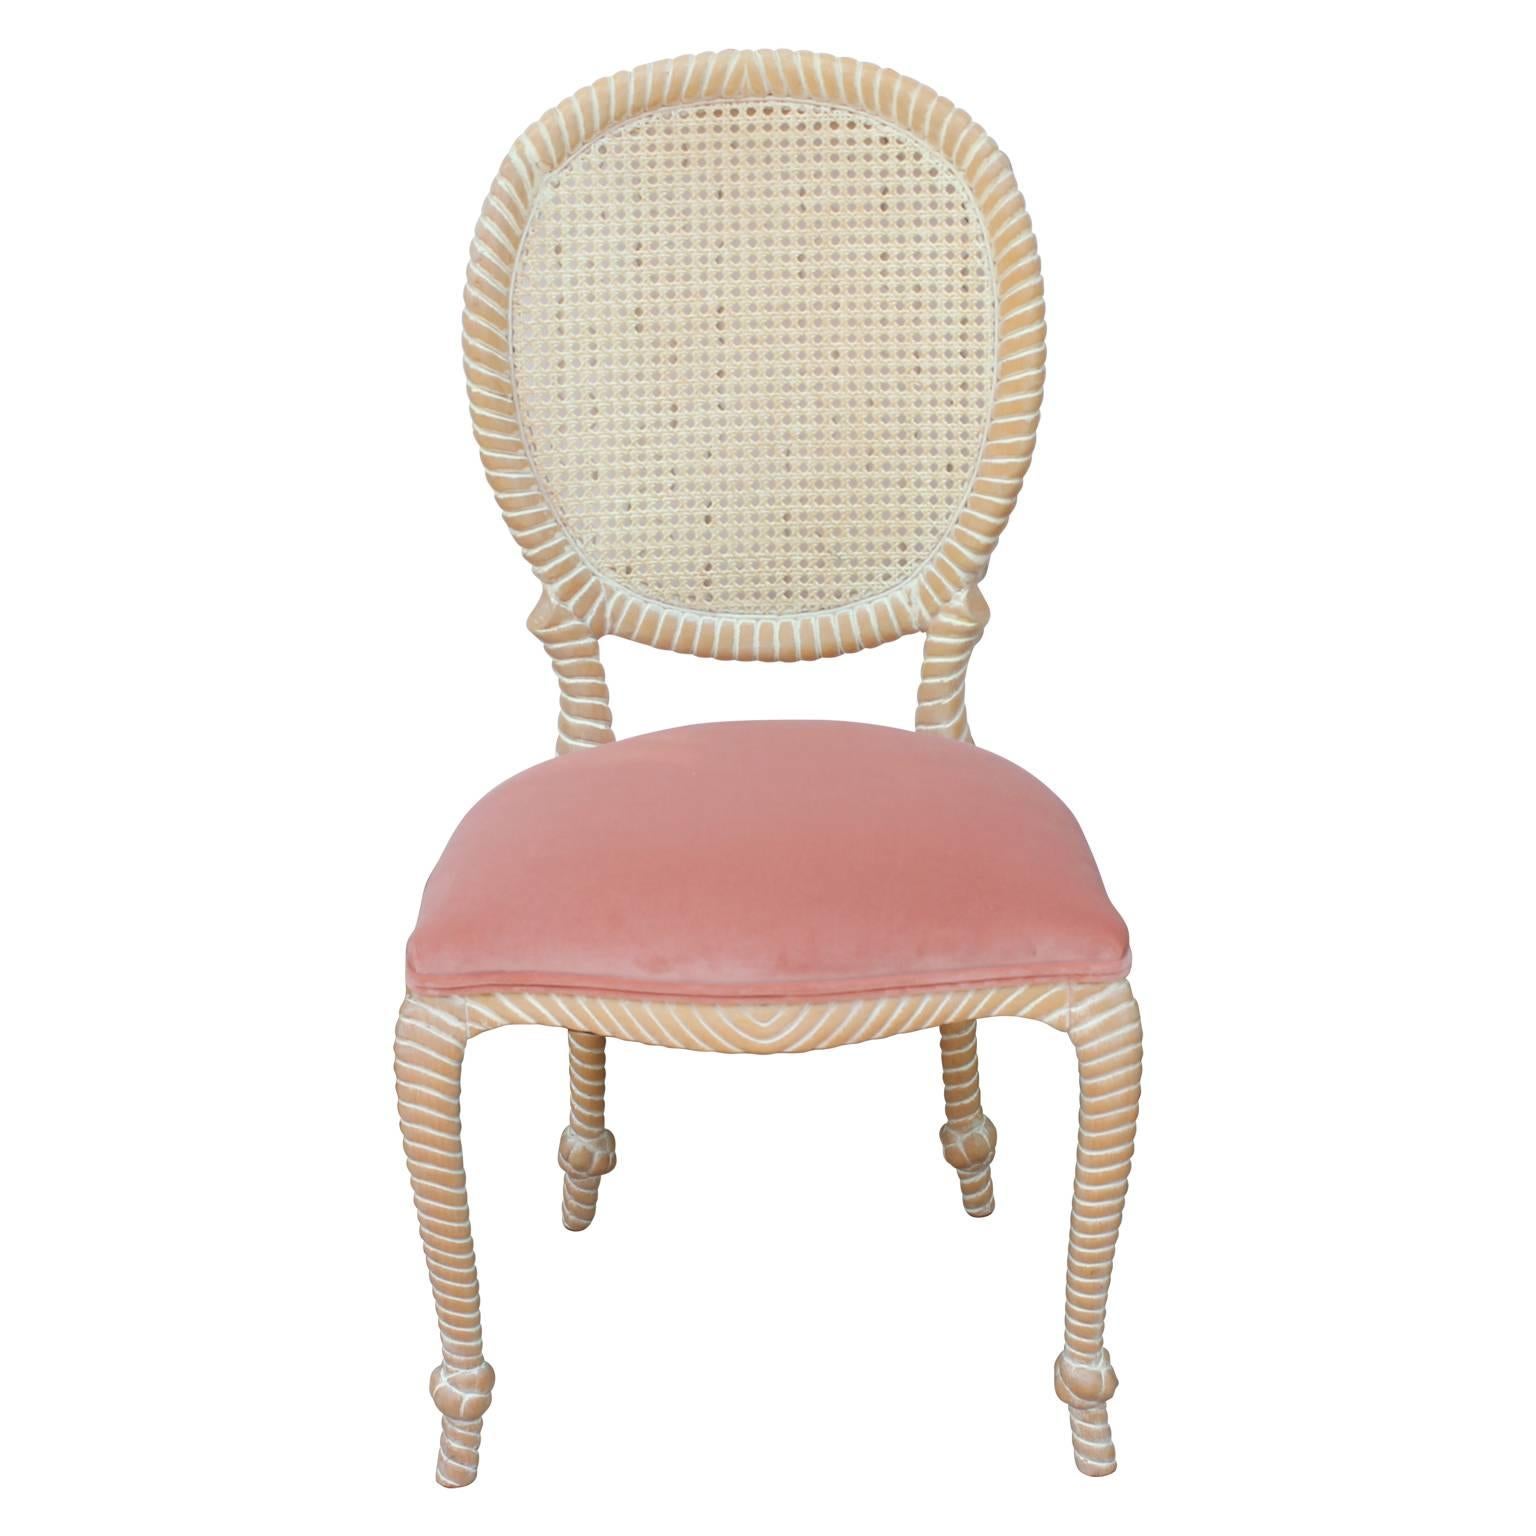 Set of five or four very unique dining chairs in bleached white washed wood that has been artfully carved with round cane backs and recently reupholstered in a beautiful light pink Kravet velvet. Such a lovely pairing of colors. Can sell just four